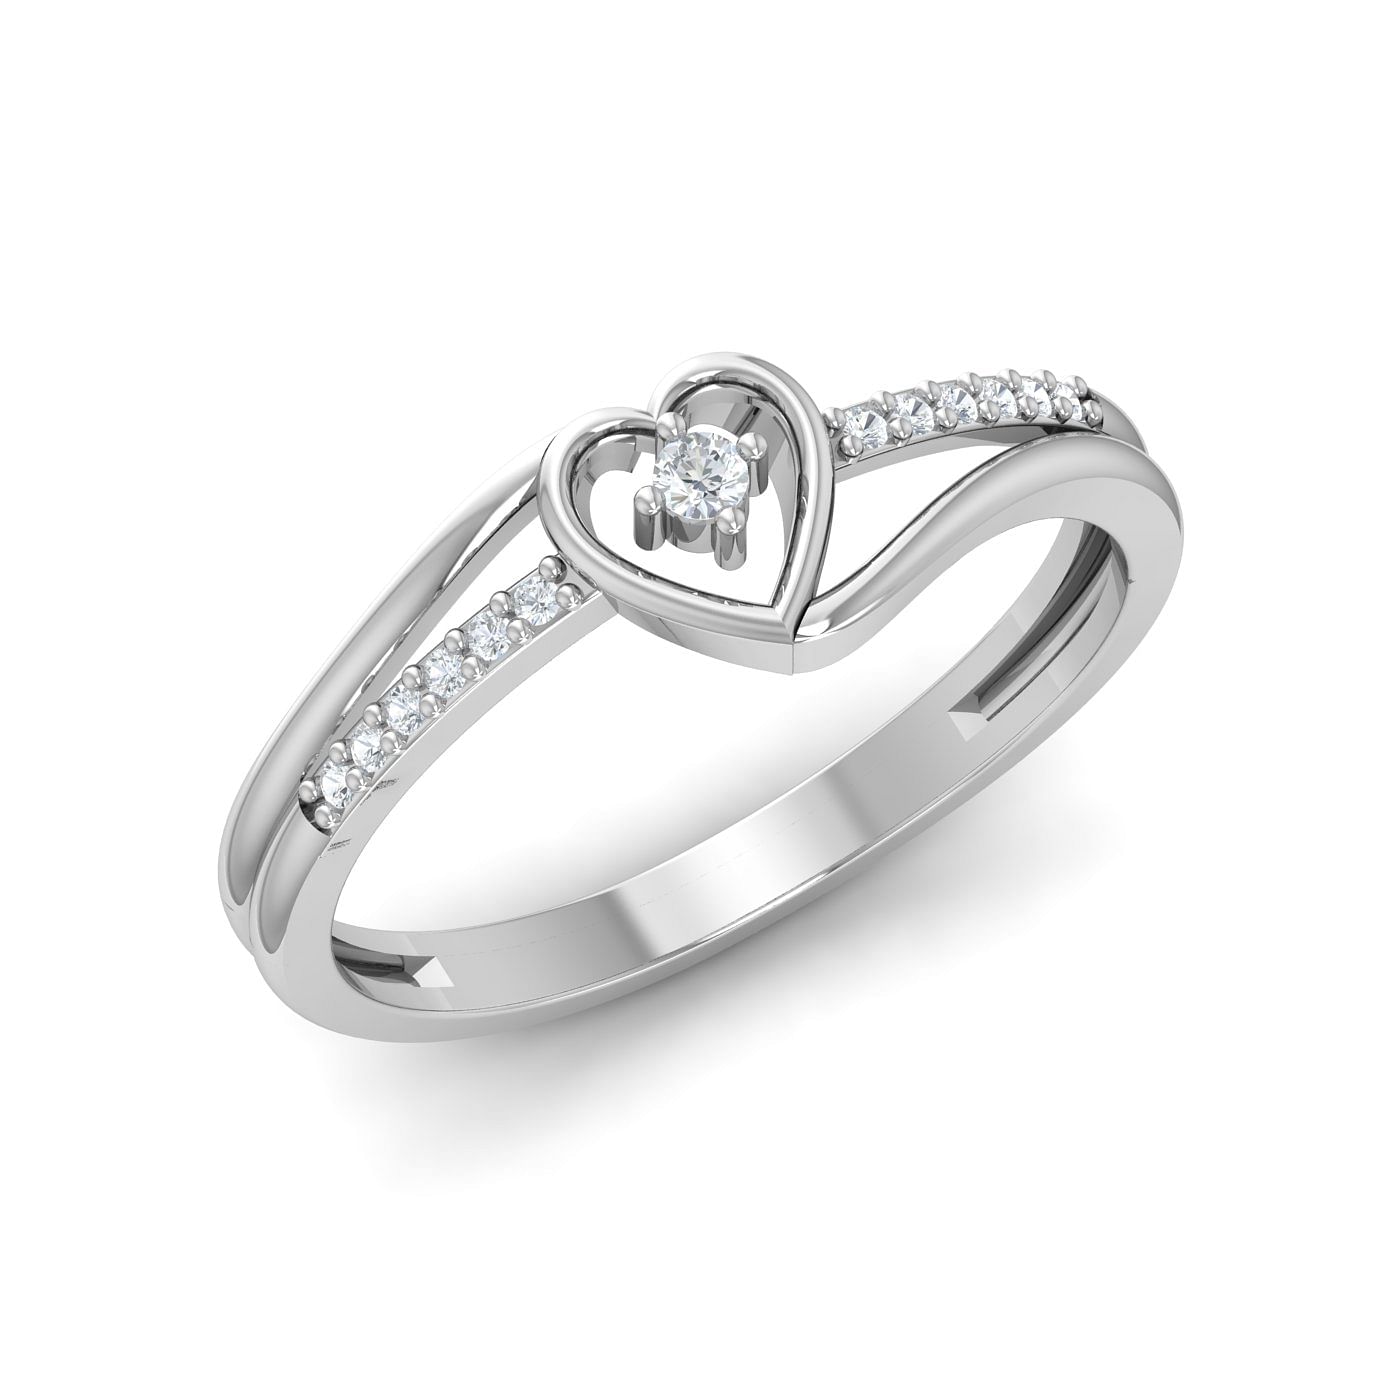 Solitaire Heart Diamond Ring In White Gold